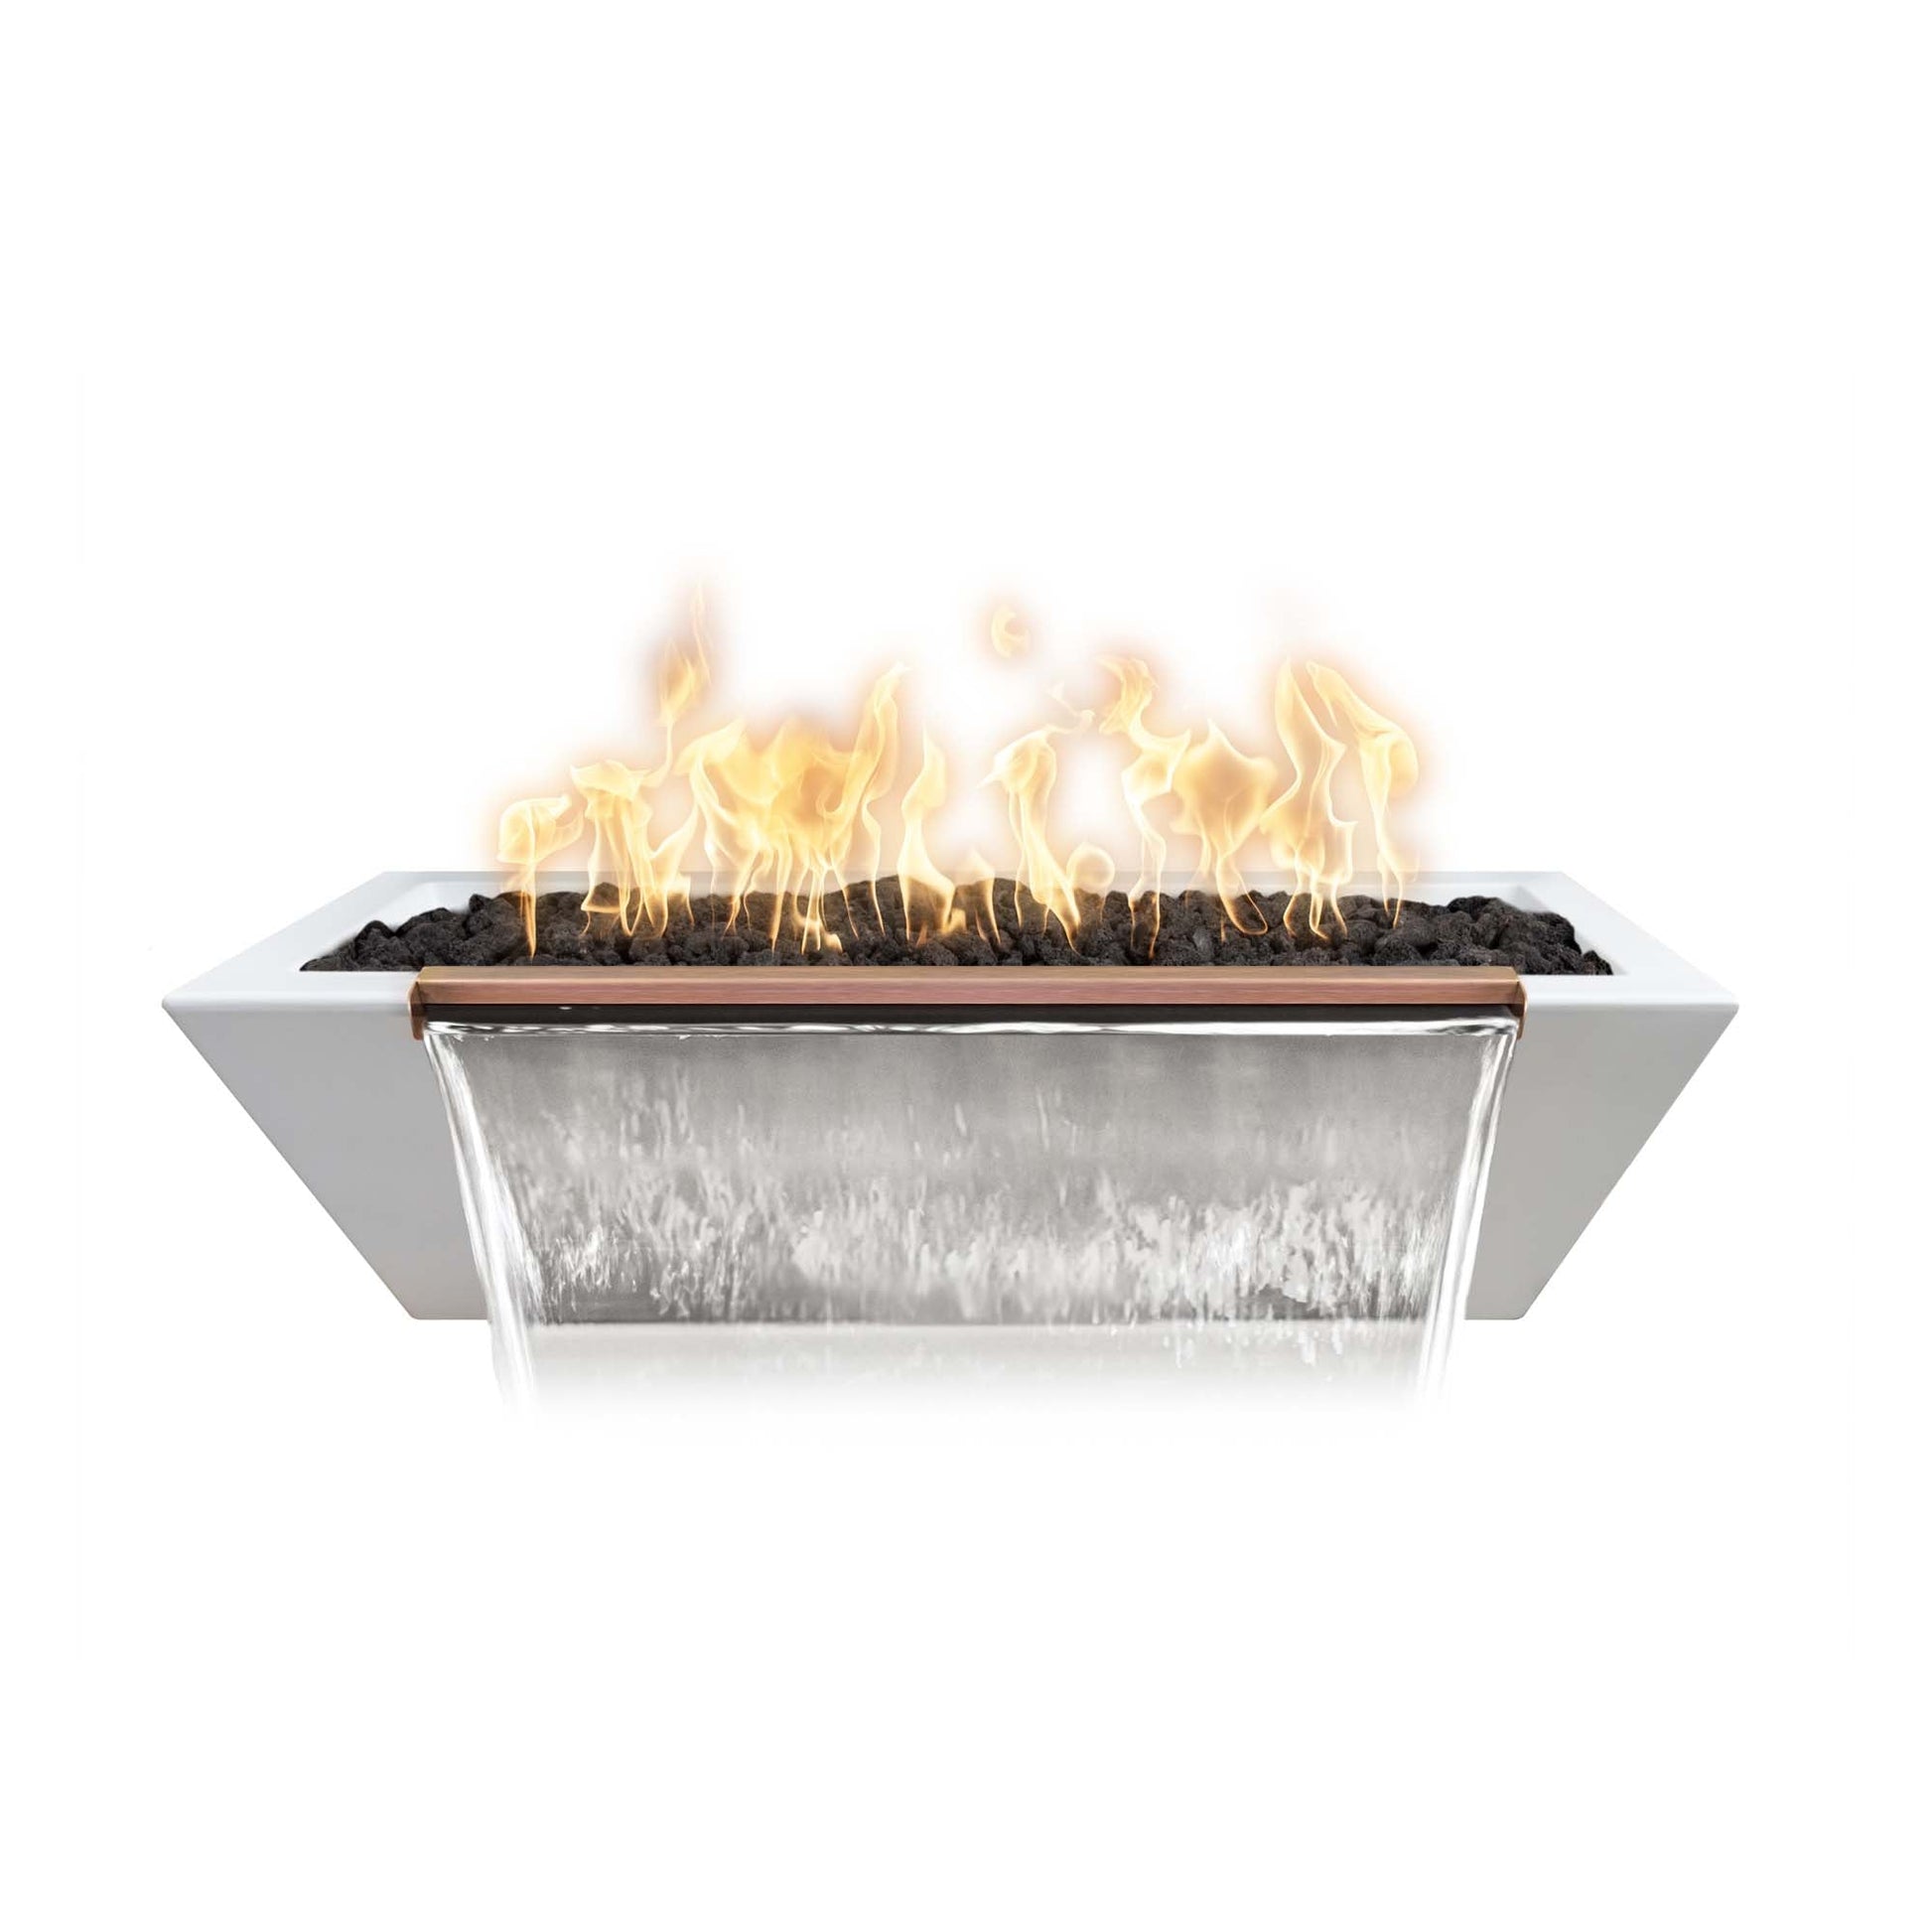 The Outdoor Plus Linear Maya 72" Natural Gray GFRC Concrete Liquid Propane Fire & Water Bowl with Match Lit with Flame Sense Ignition